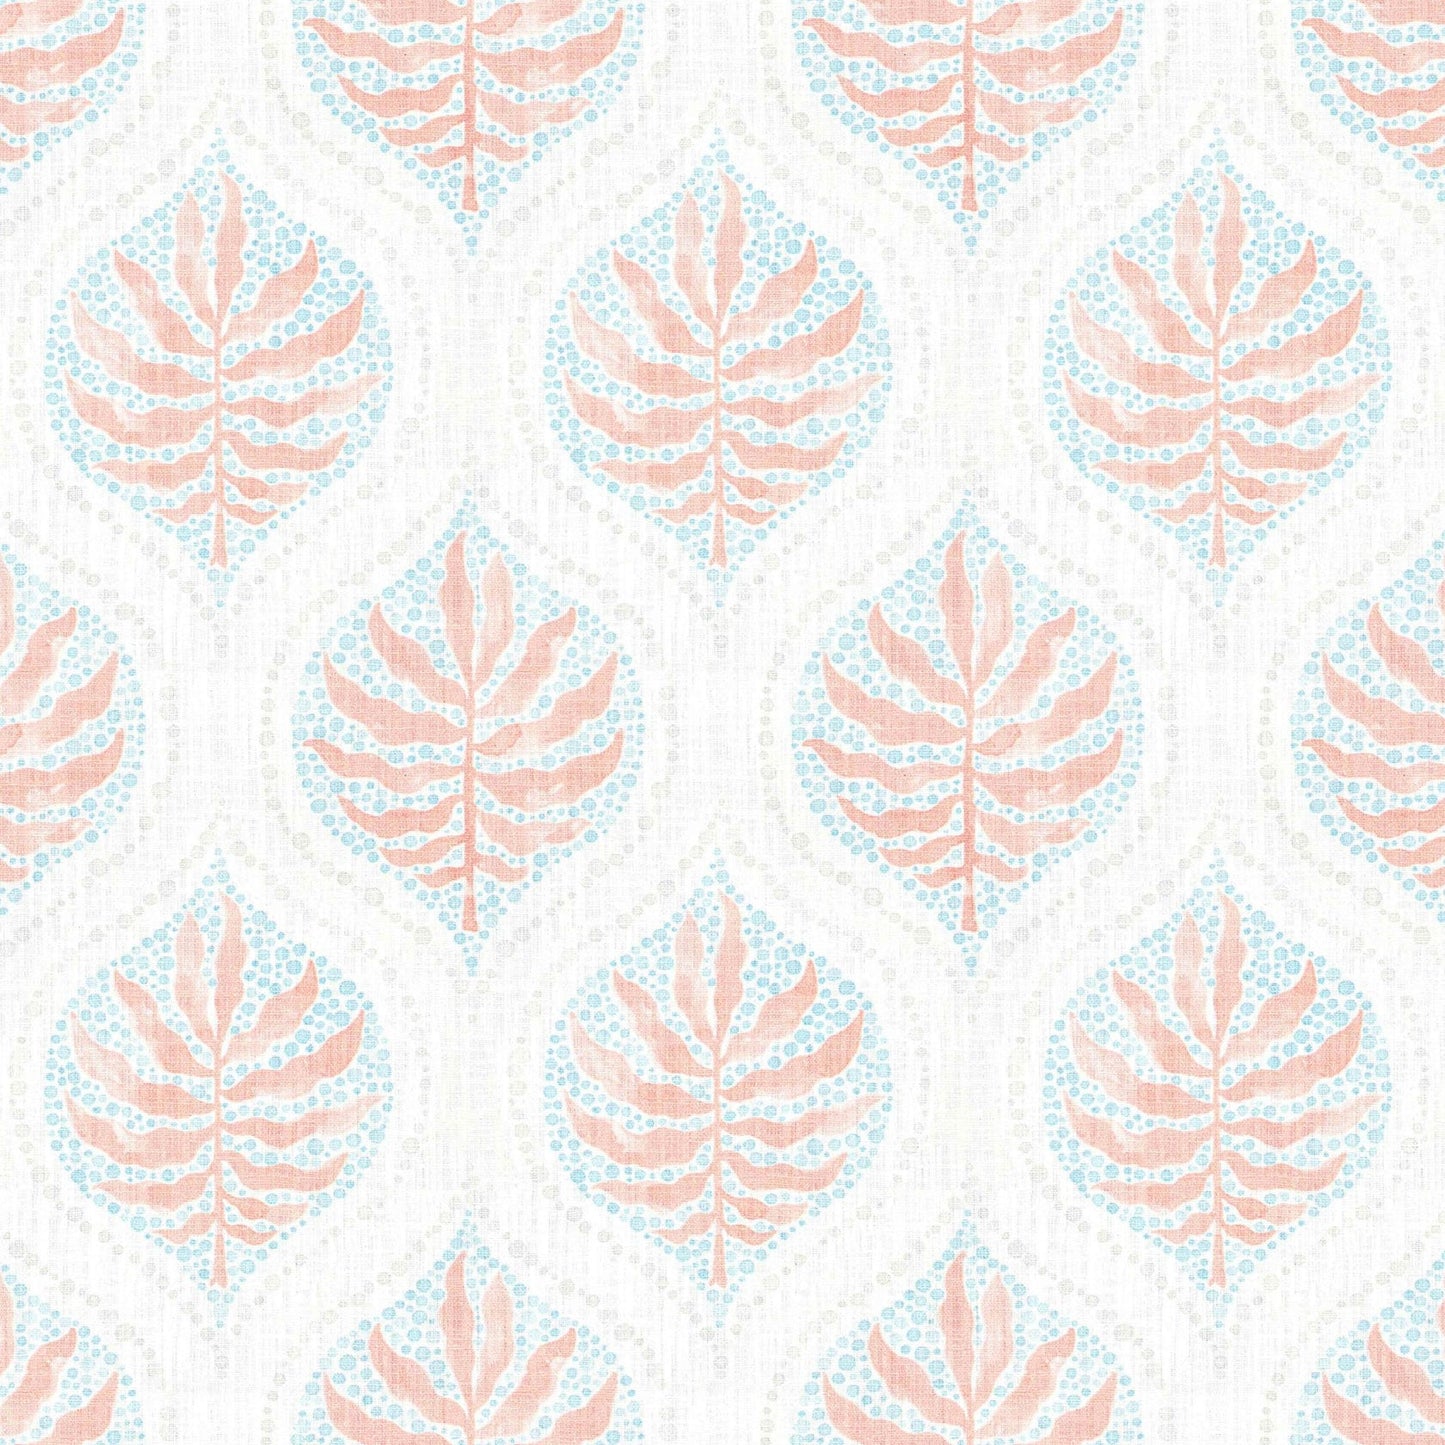 Scalloped Valance in Airlie Coral Ogee Floral Watercolor - with Blue, Gray